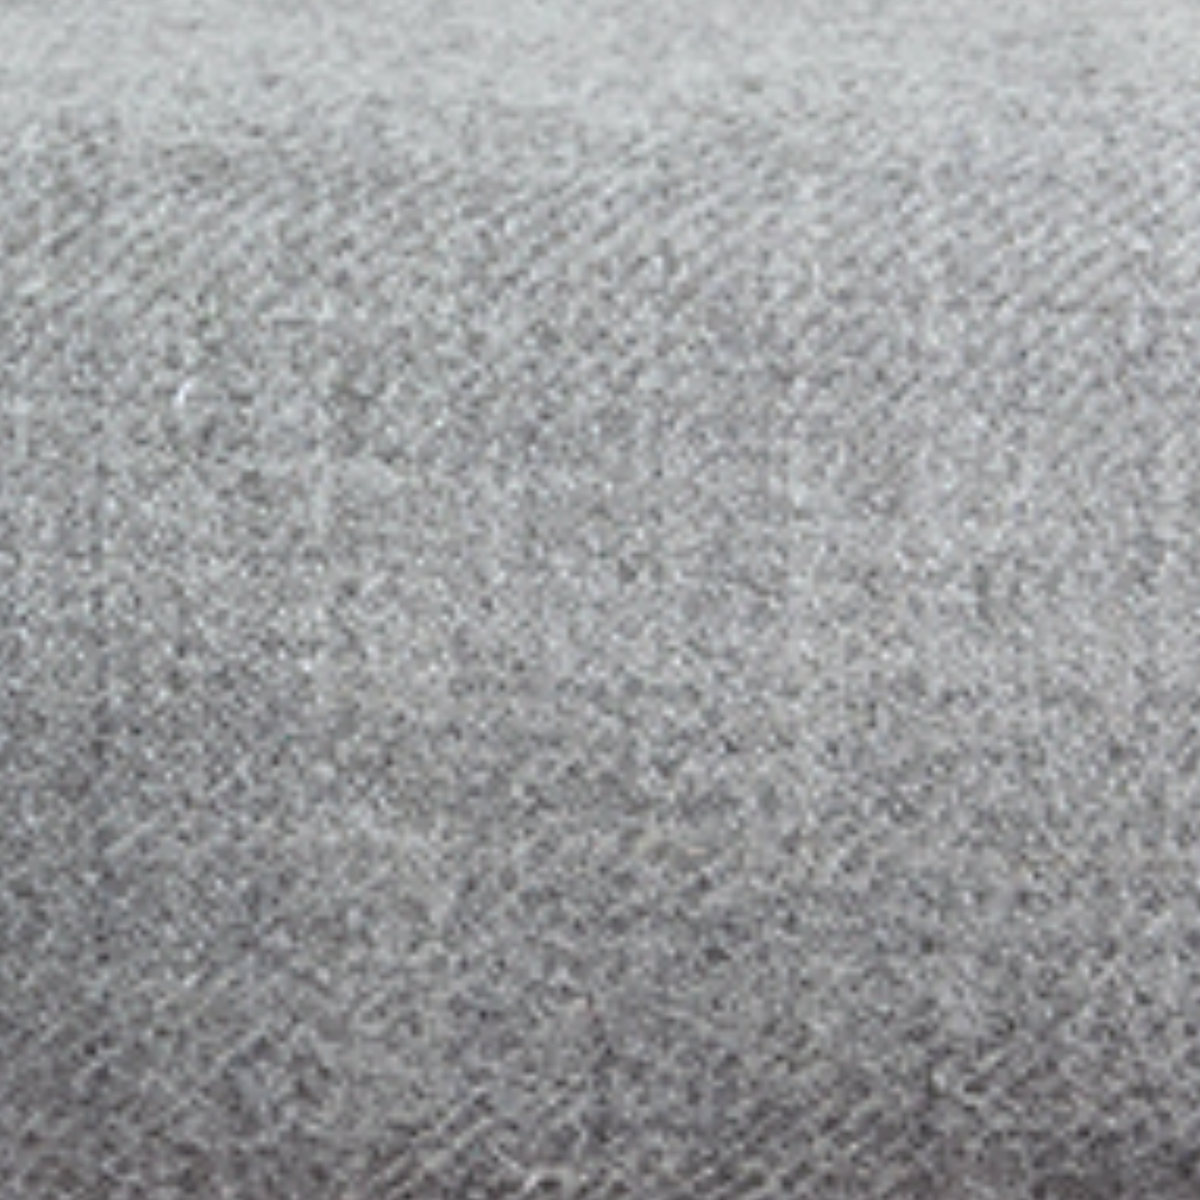 Swatch Sample of Downtown Company Alpaca Throws in Light Gray Color